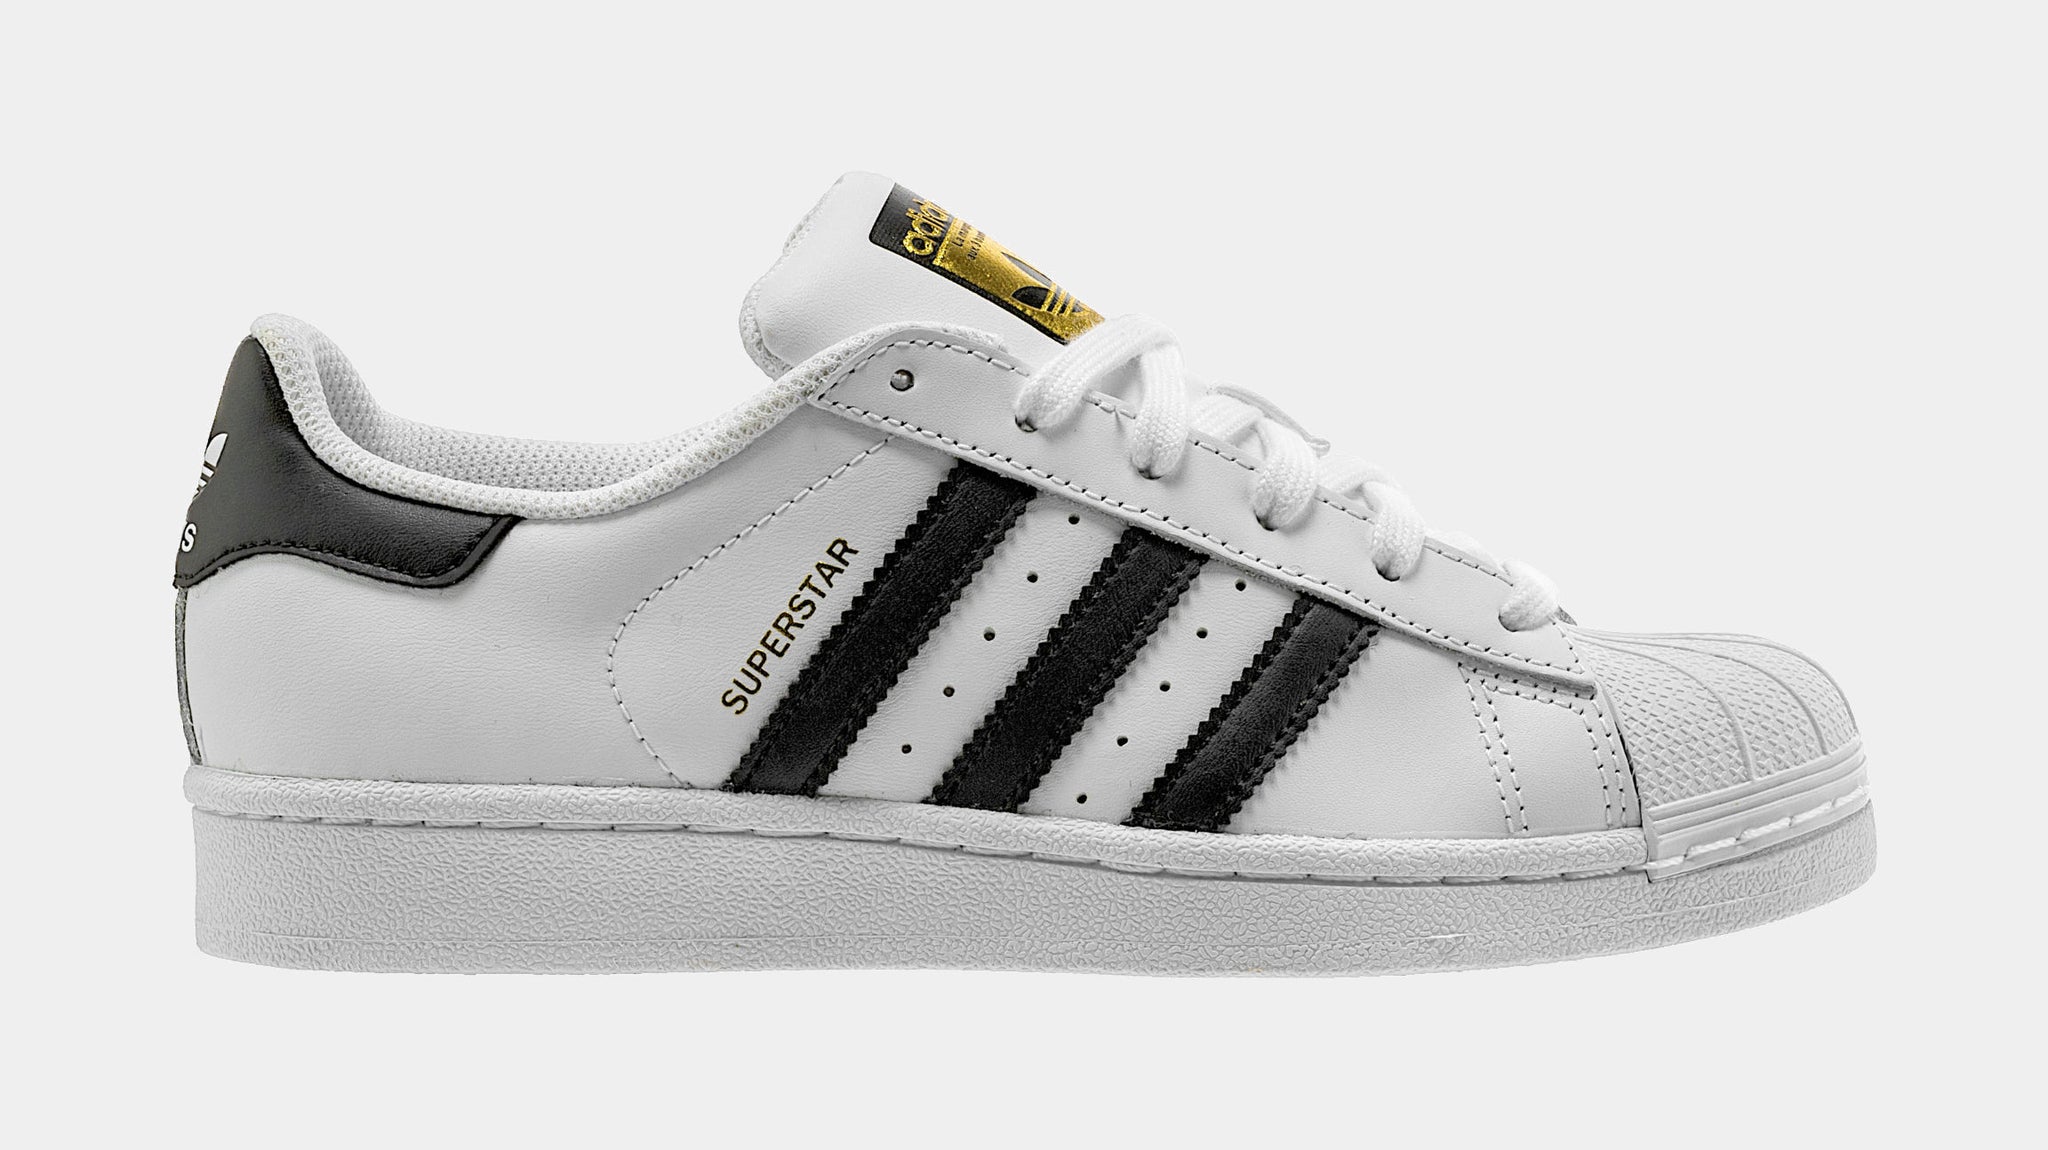 Old School shell toe Superstar Adidas tennis shoes.